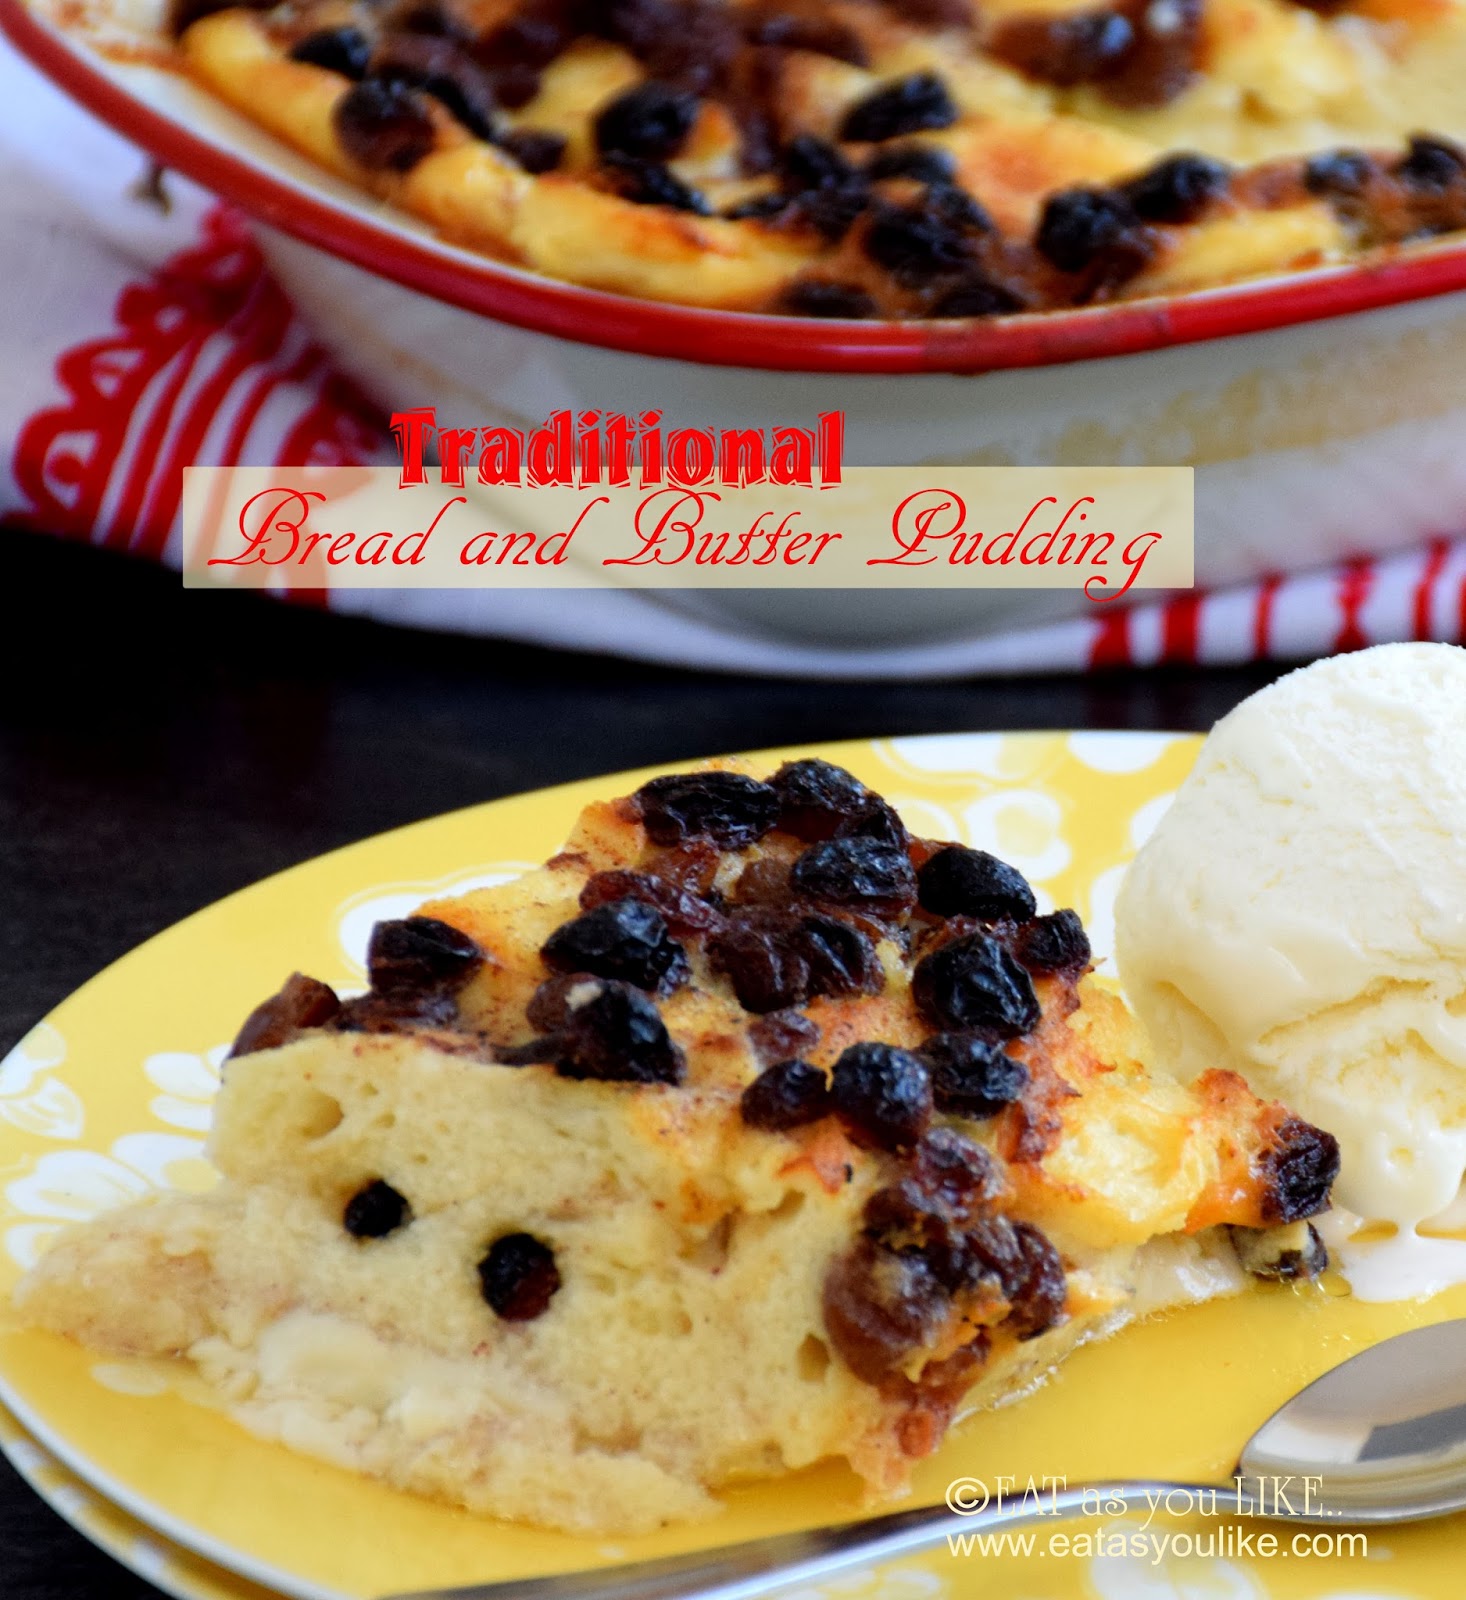 Eat as you Like: TRADITIONAL BREAD AND BUTTER PUDDING